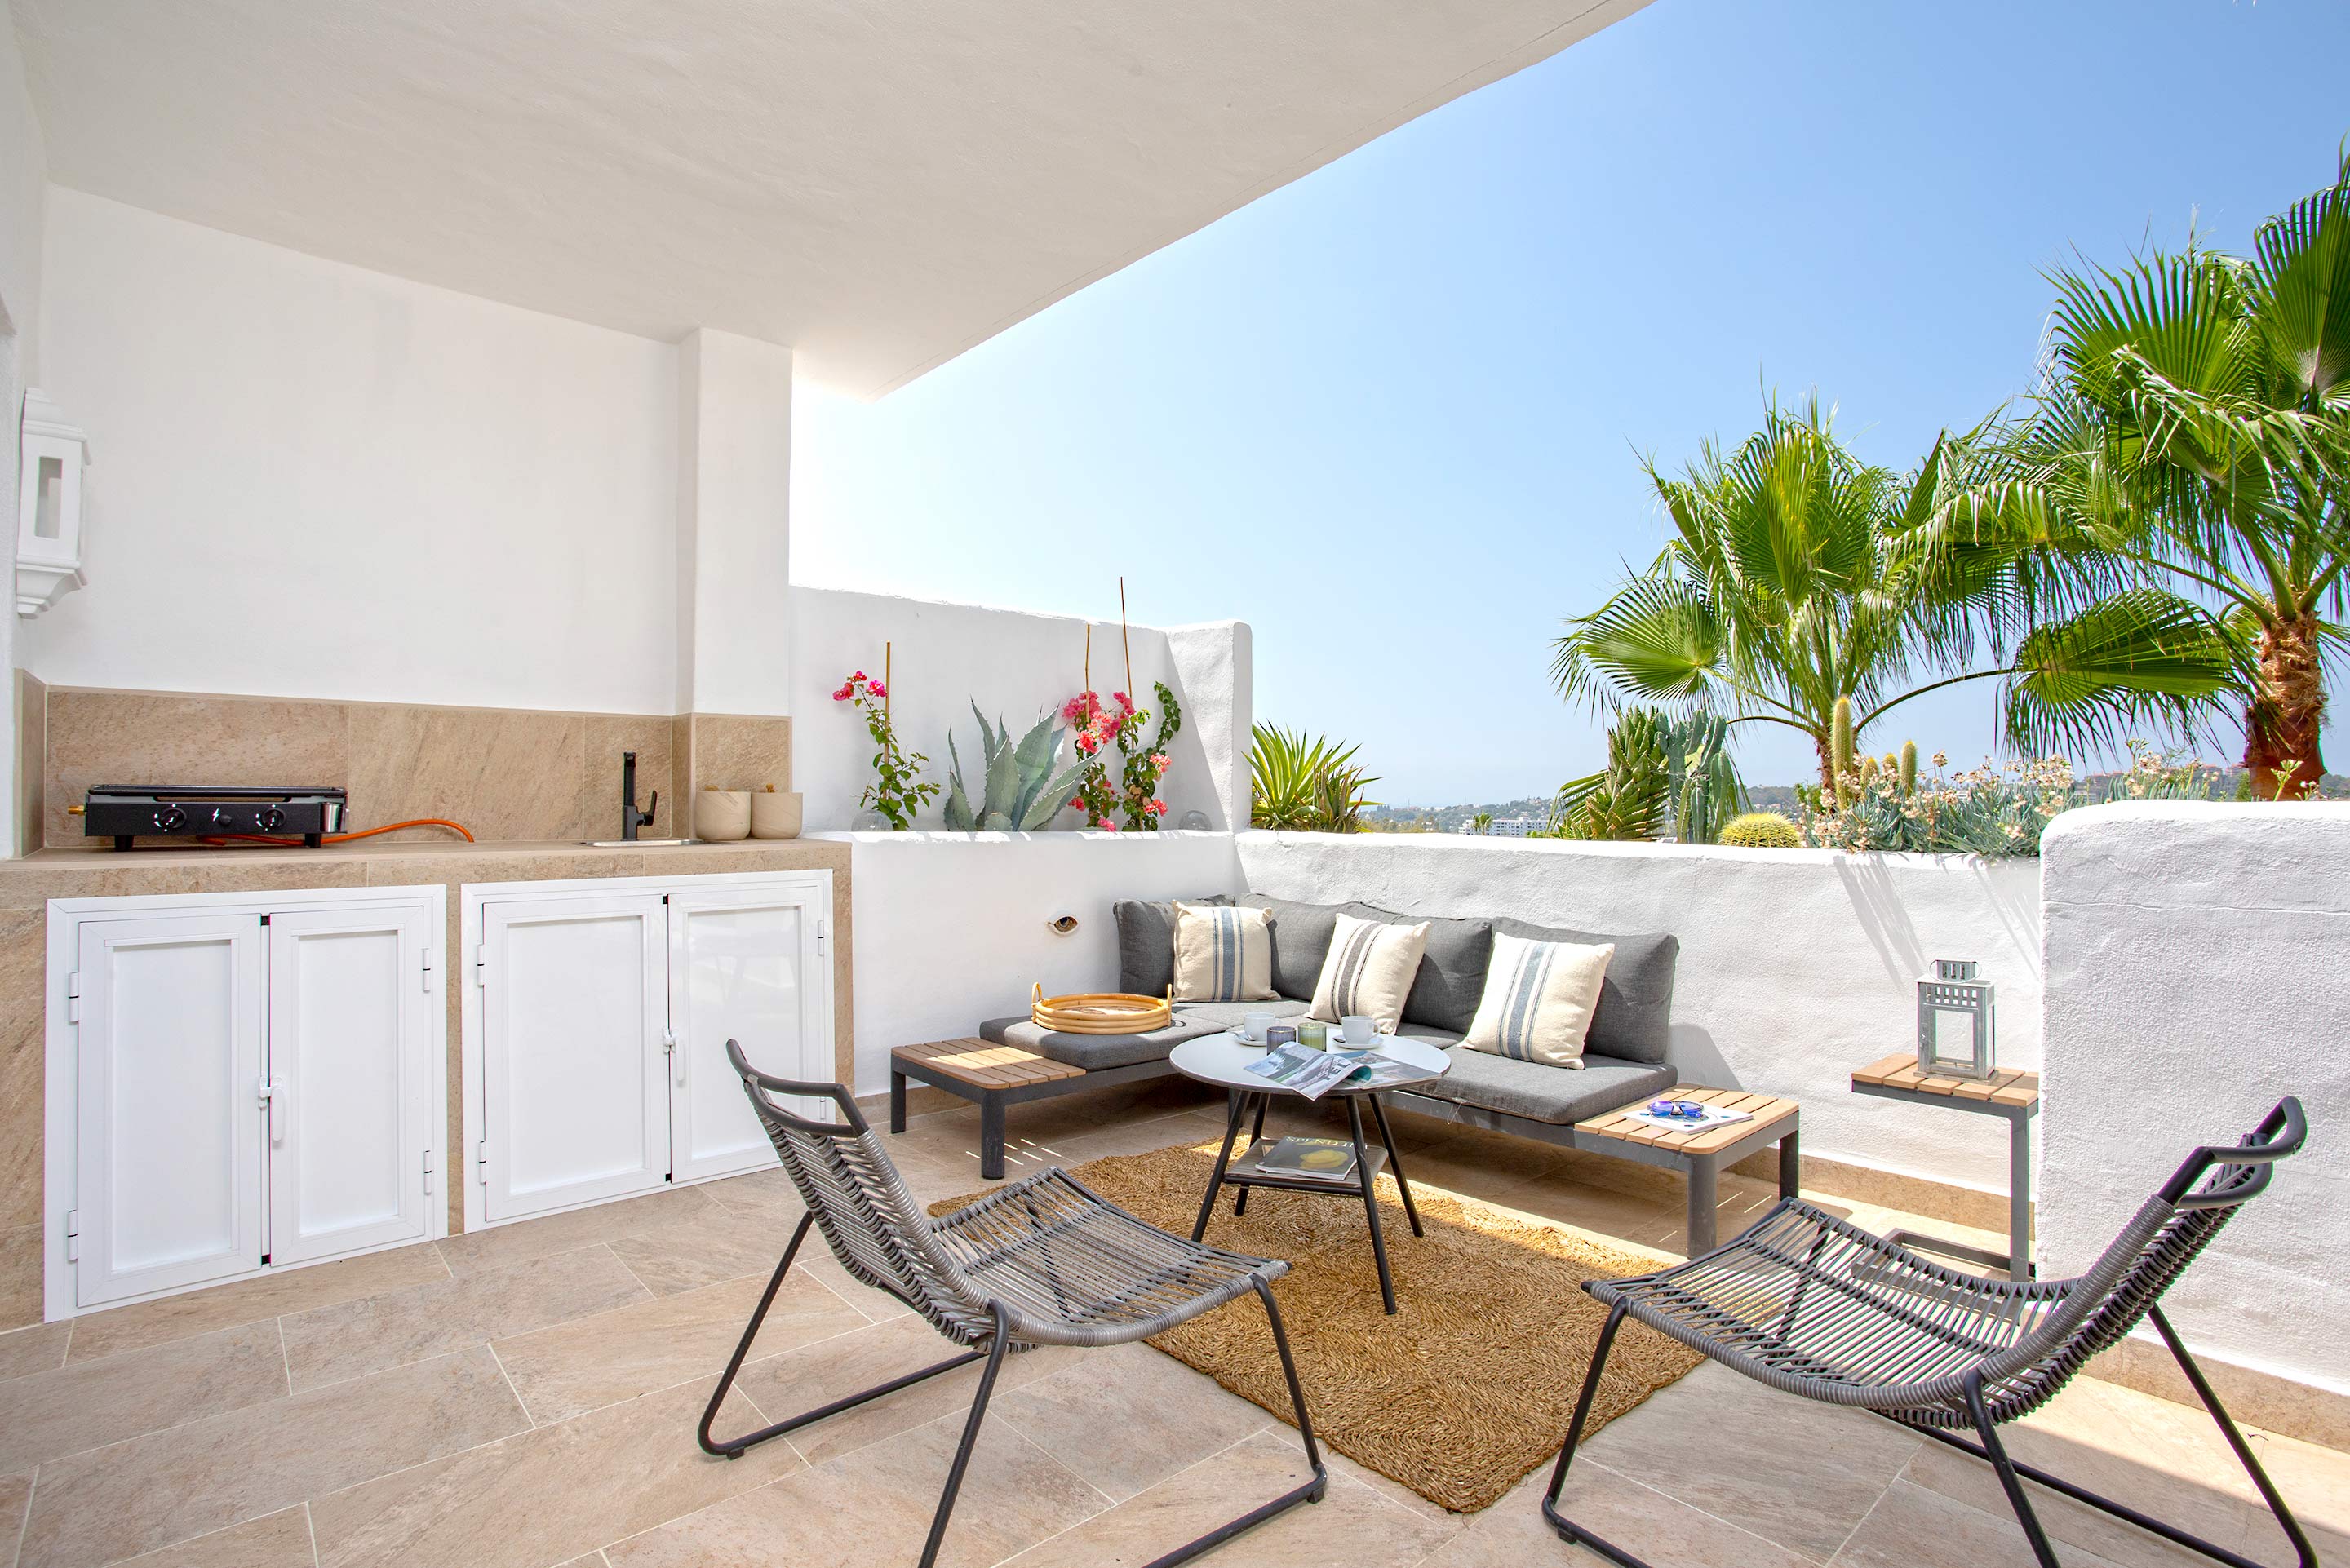 Property Image 2 - Luxury apartment in Marbella. Tortugas Terrace